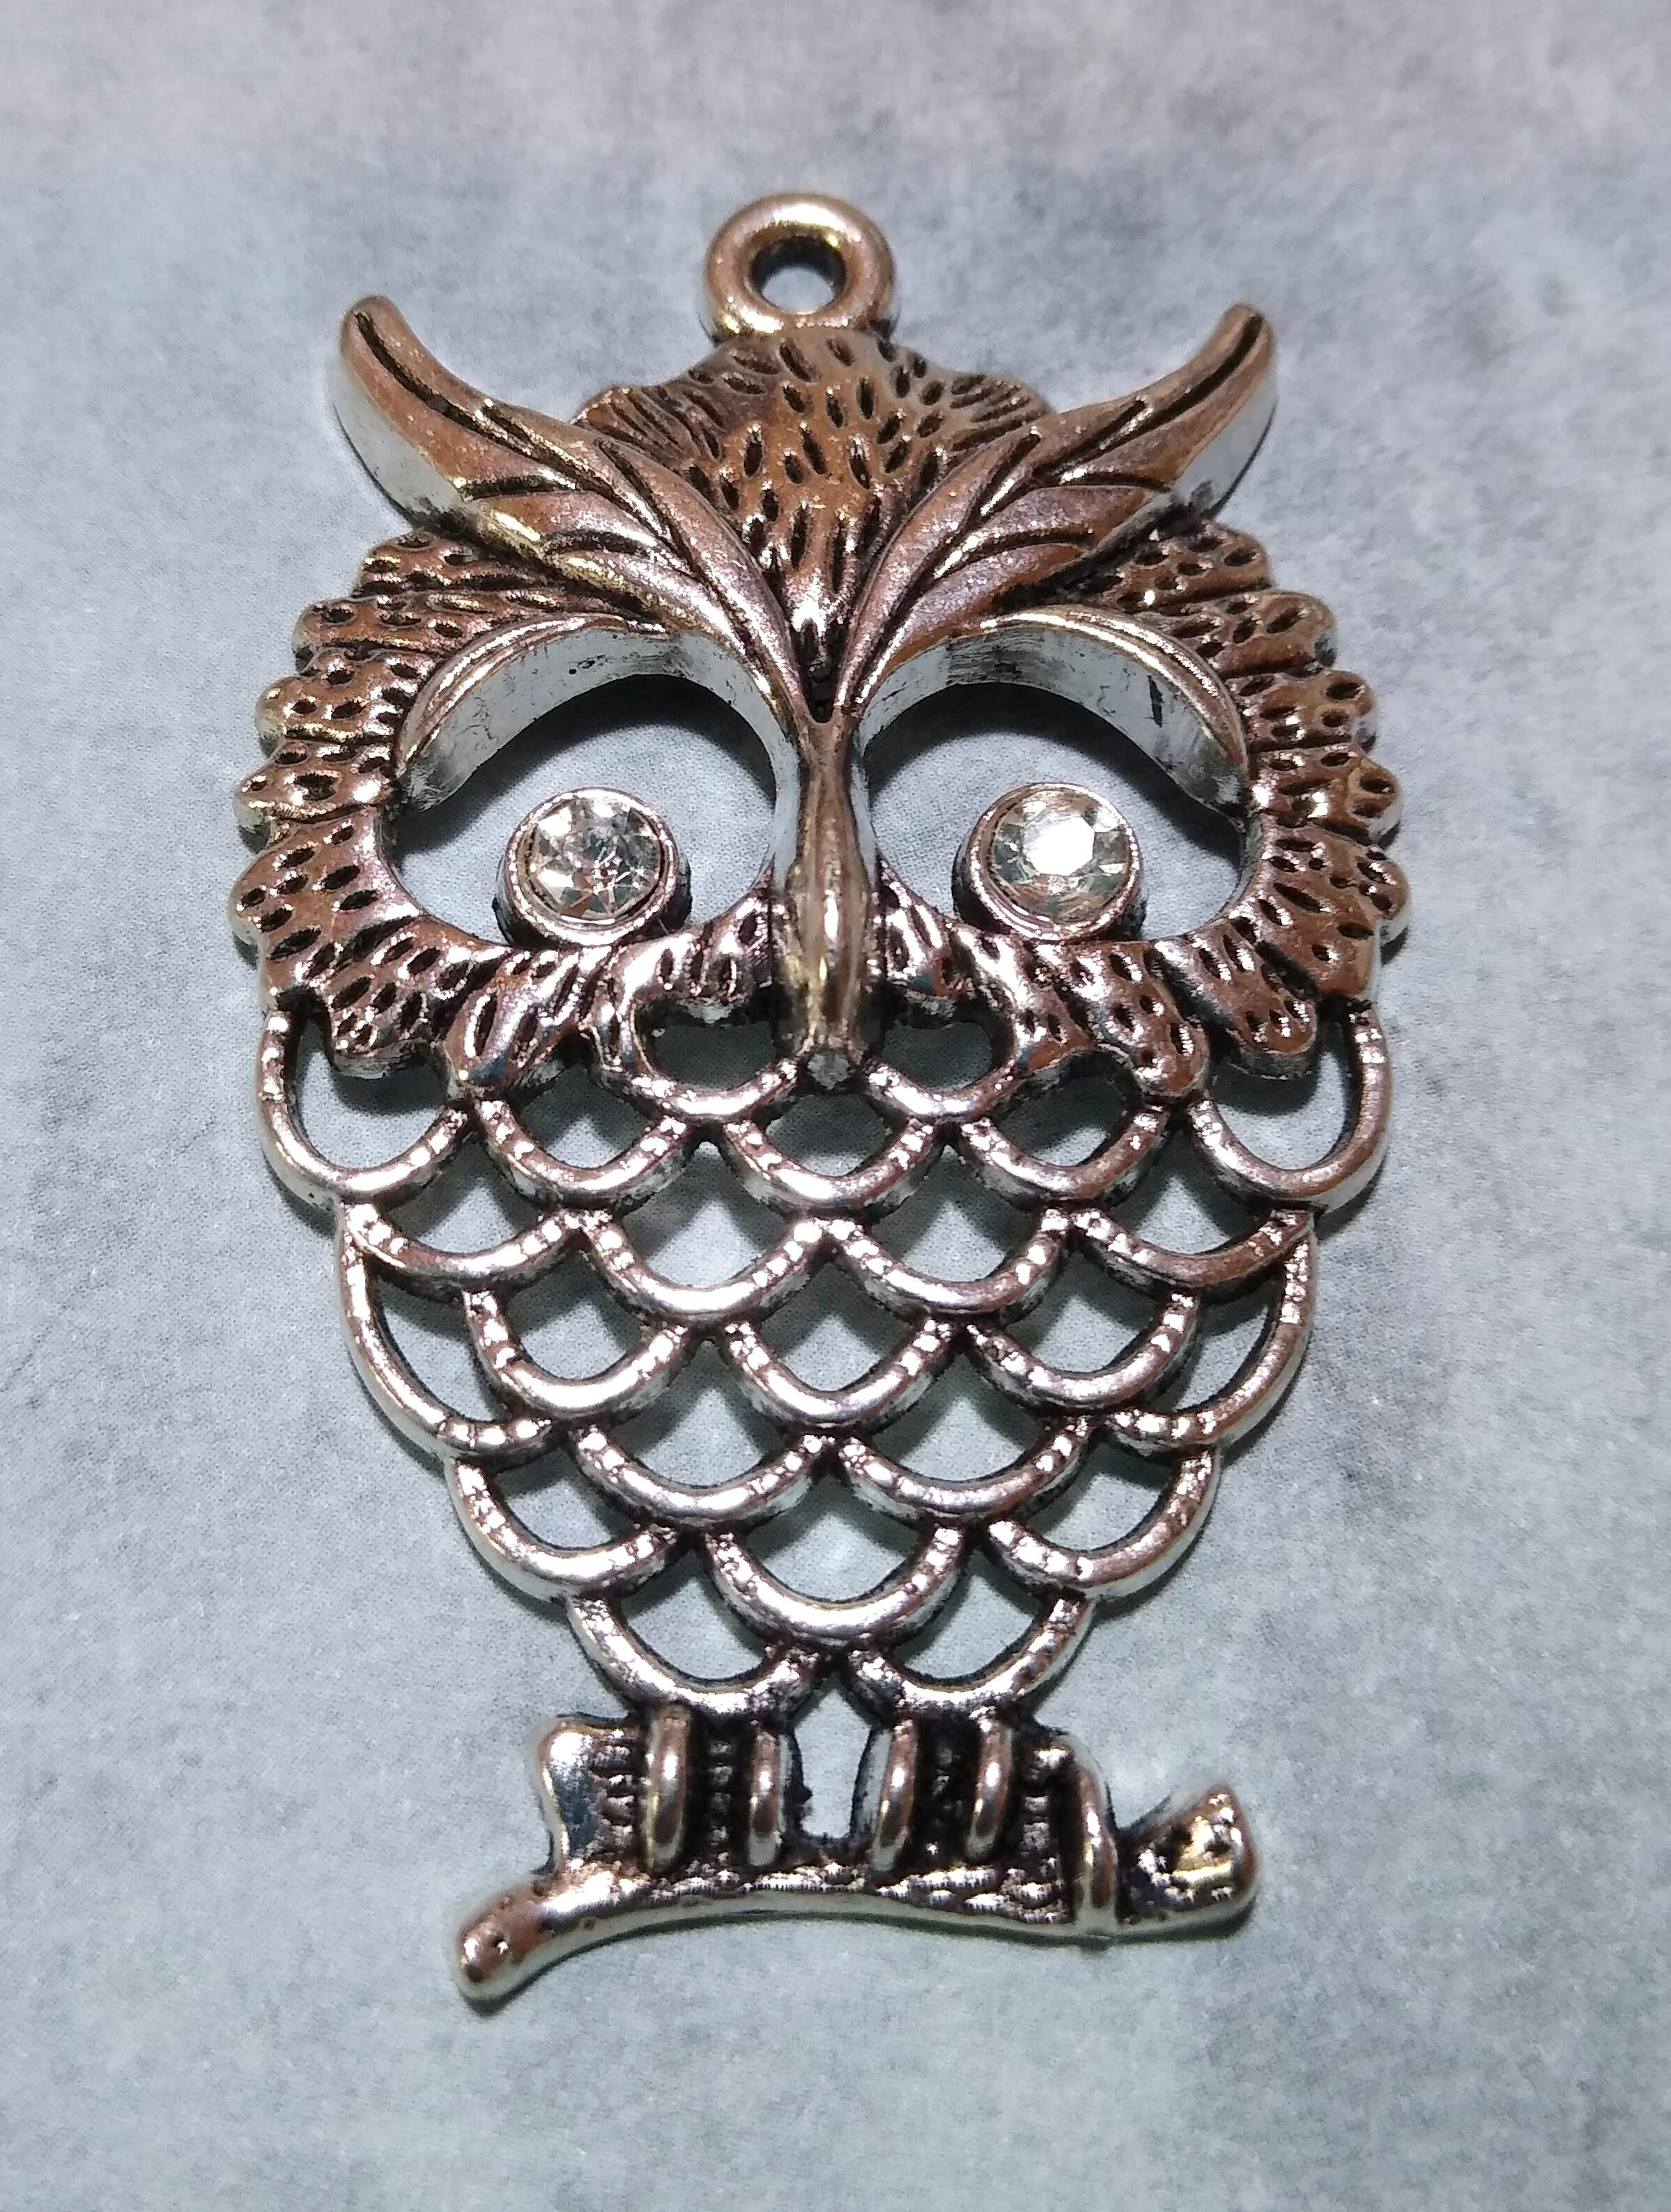 60mm x 45mm Owl Pendant Charm - Ant. Silver Plate